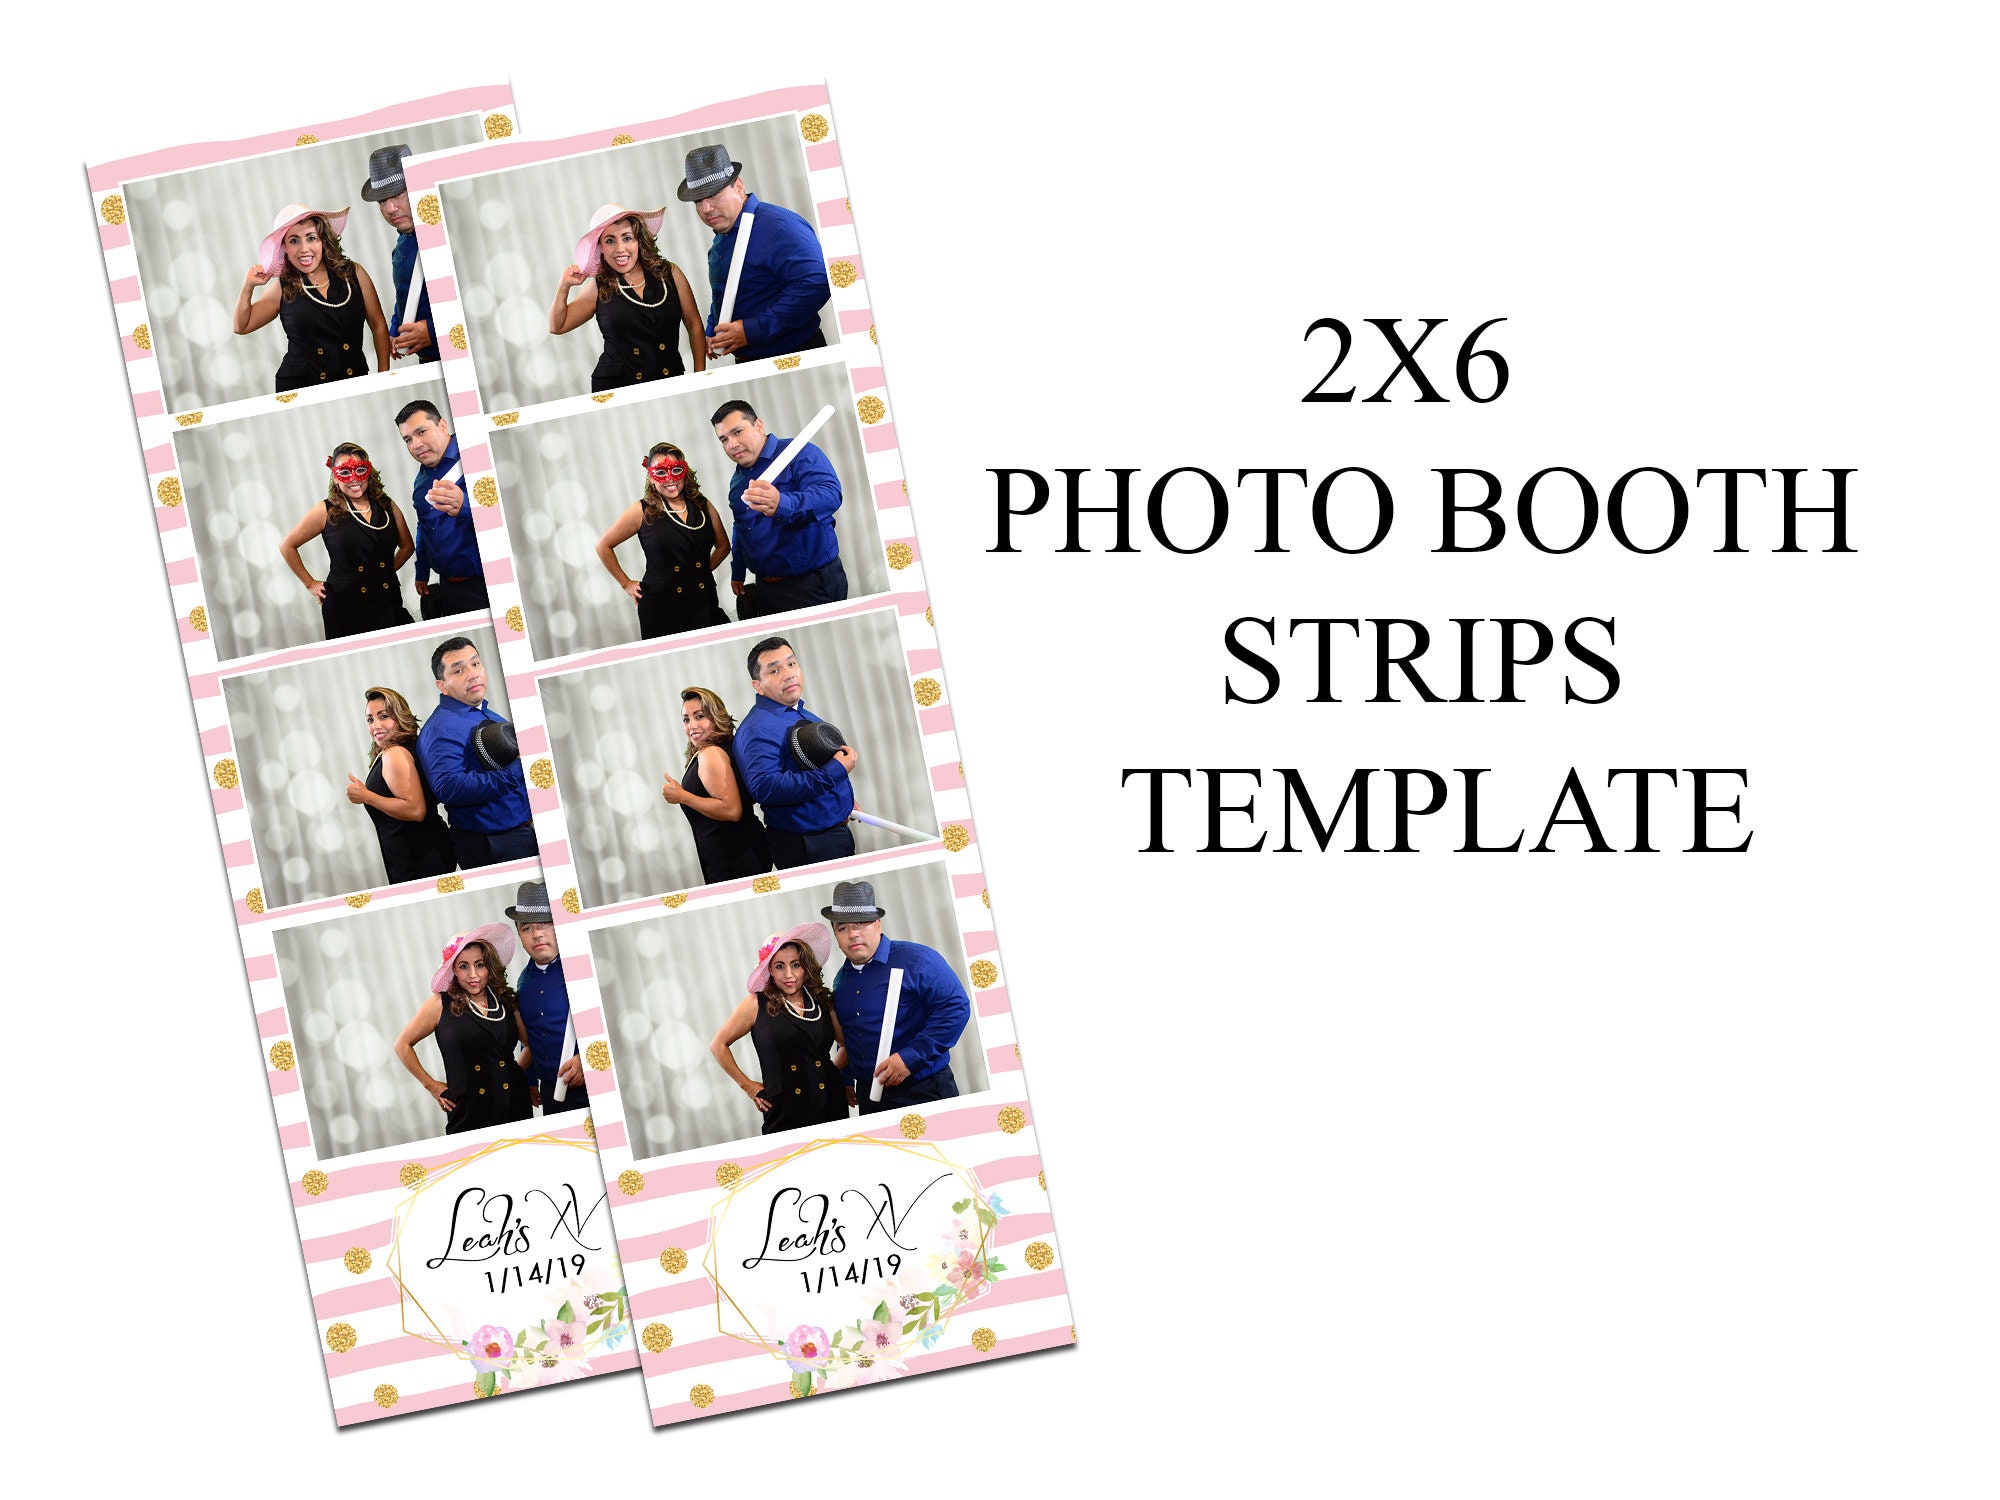 photo-booth-template-4x6-photo-booth-template-photo-booth-etsy